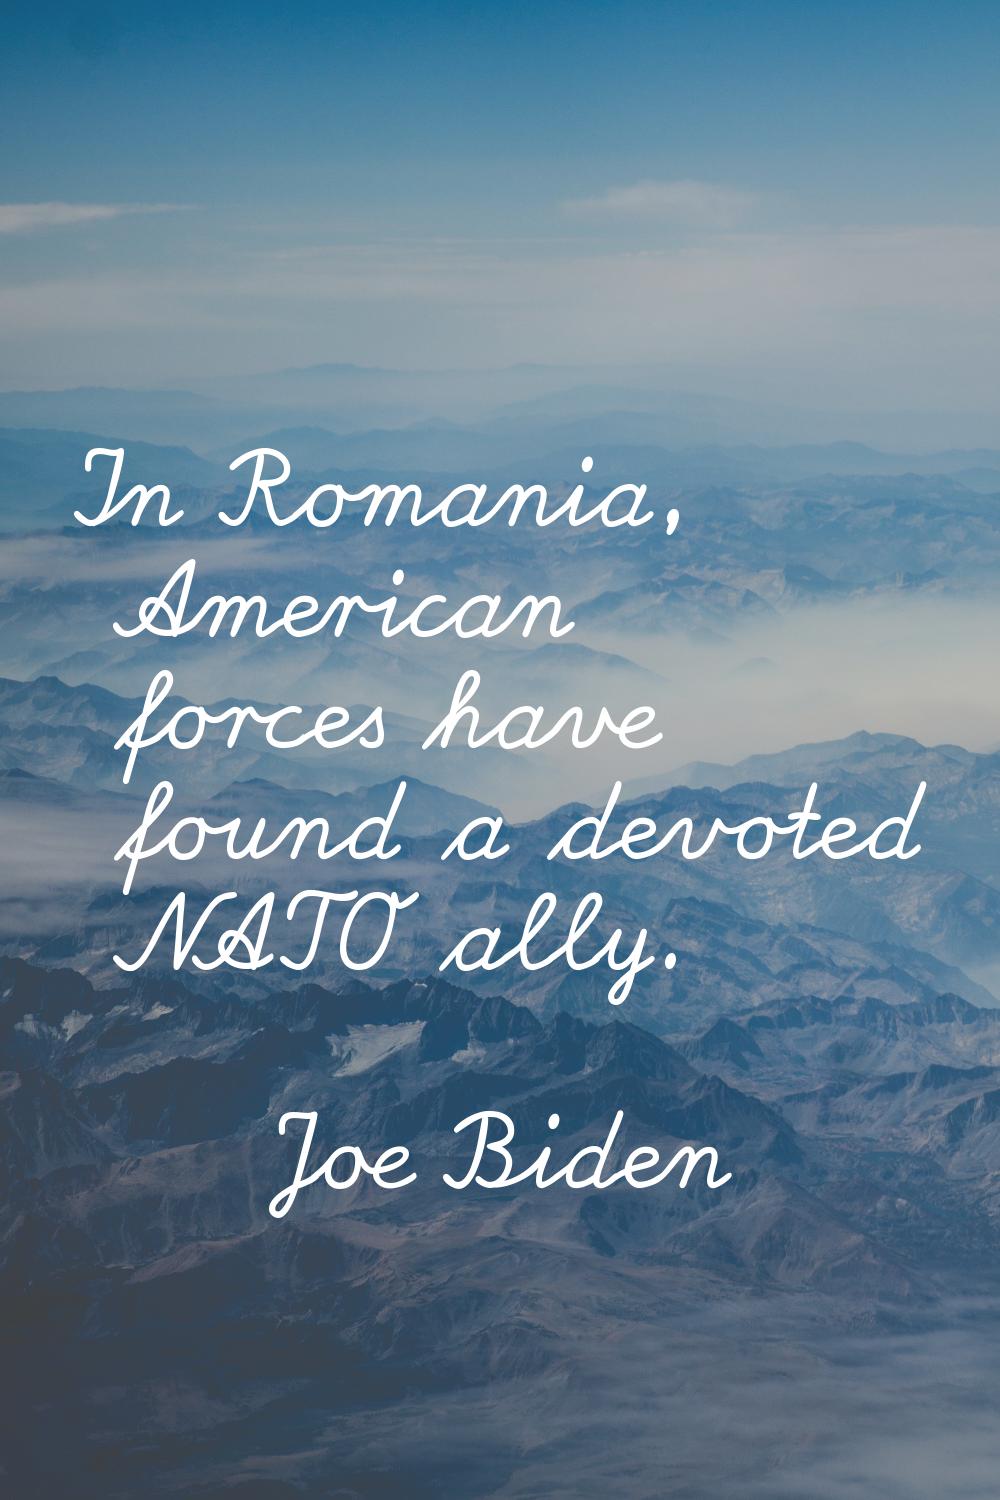 In Romania, American forces have found a devoted NATO ally.